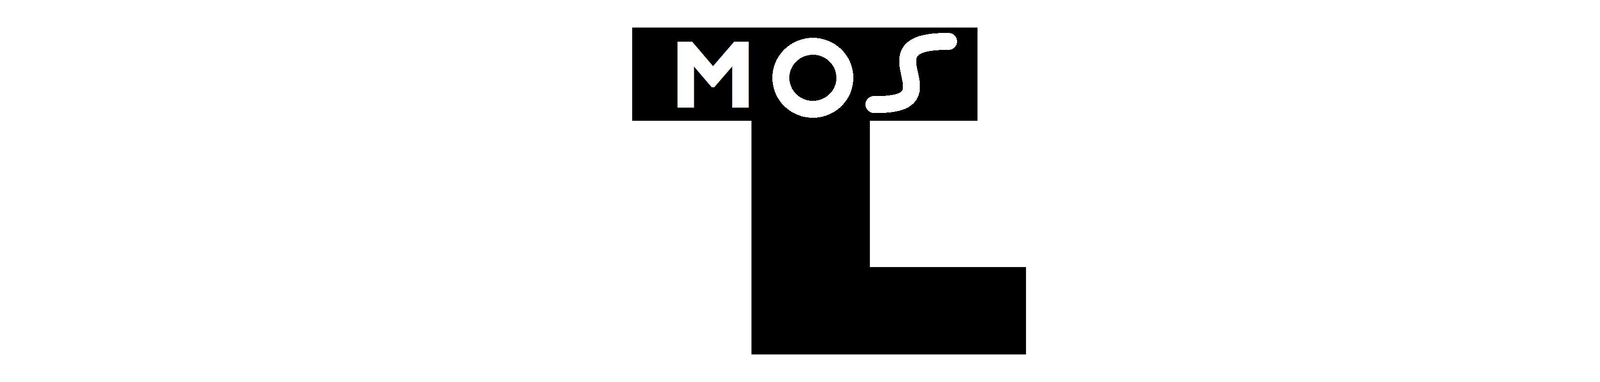 mostechlabs.com